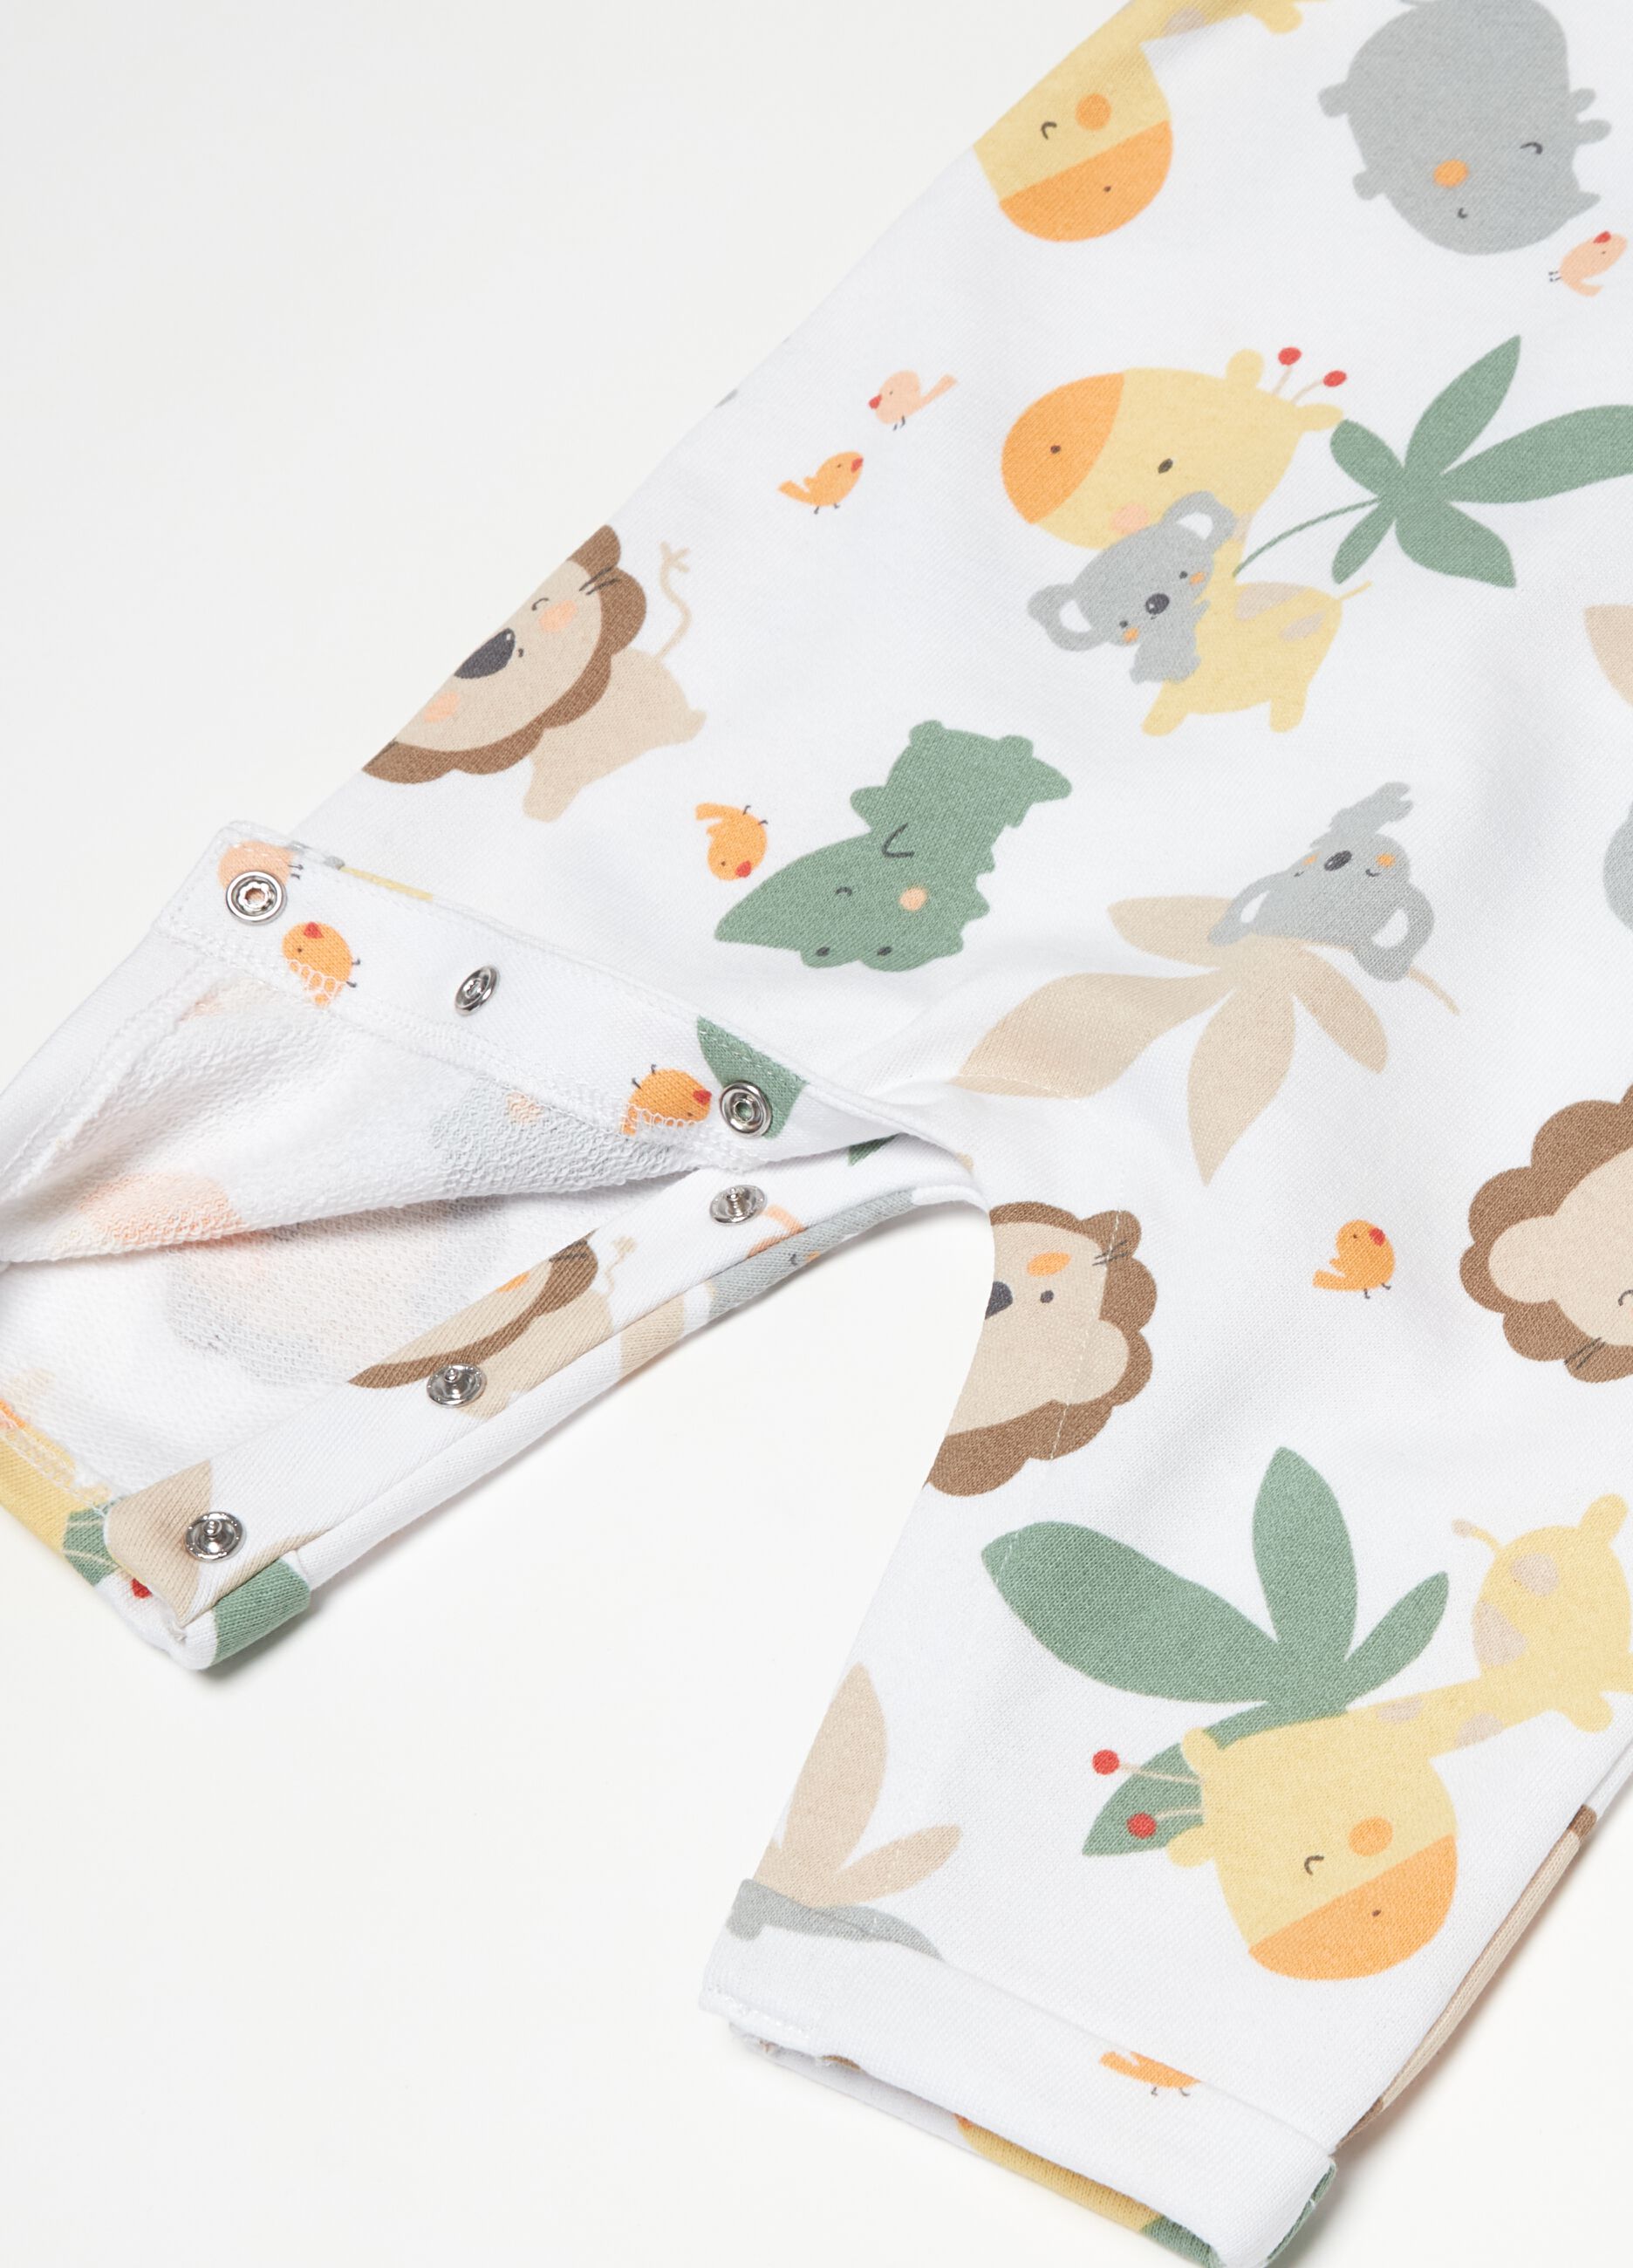 French terry onesie with animals print